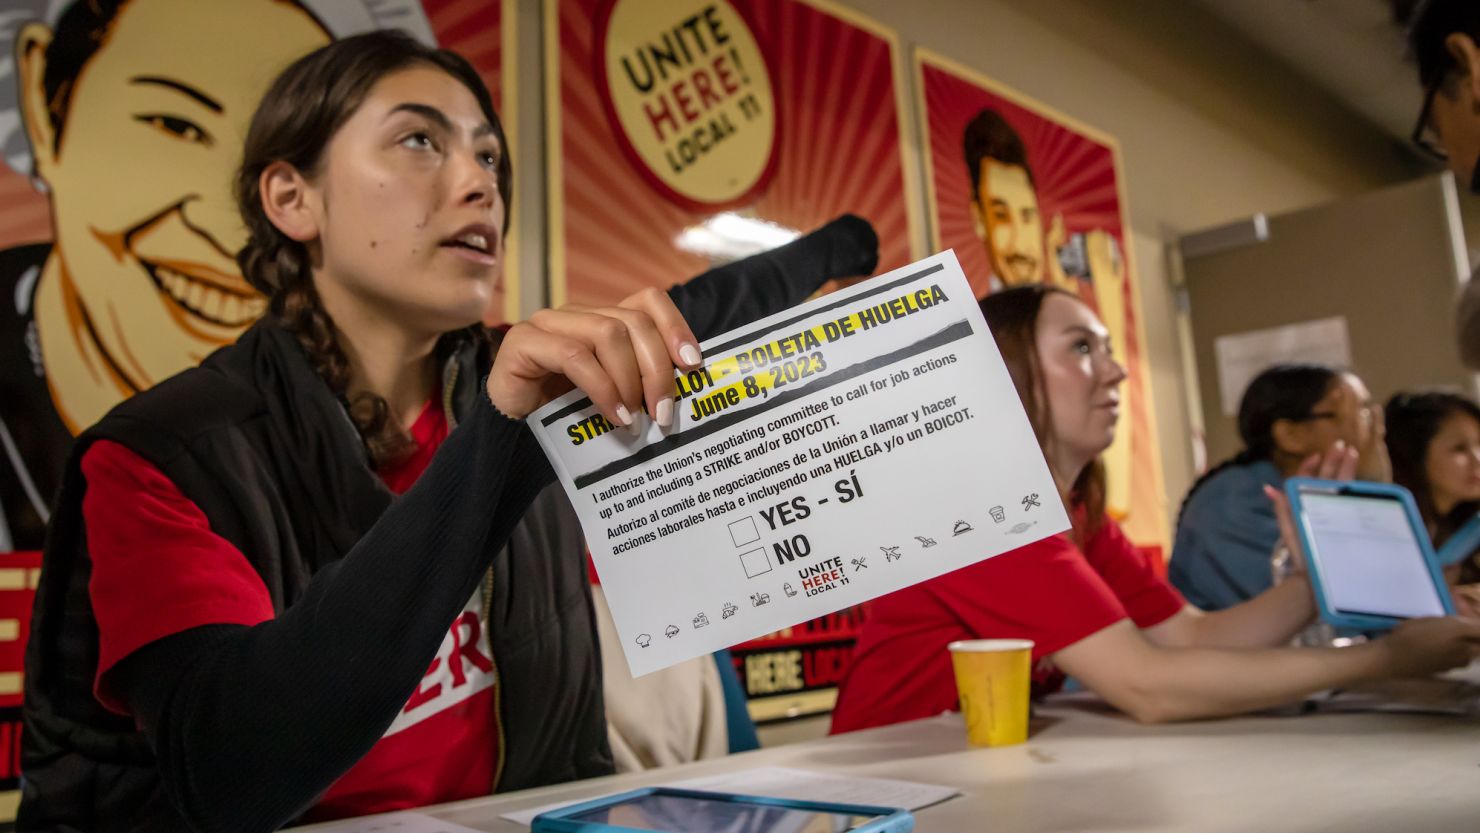 Marissa Langley attends to hotel workers coming for a strike authorization vote at the Unite Here 11 office in Los Angeles on June 8. 